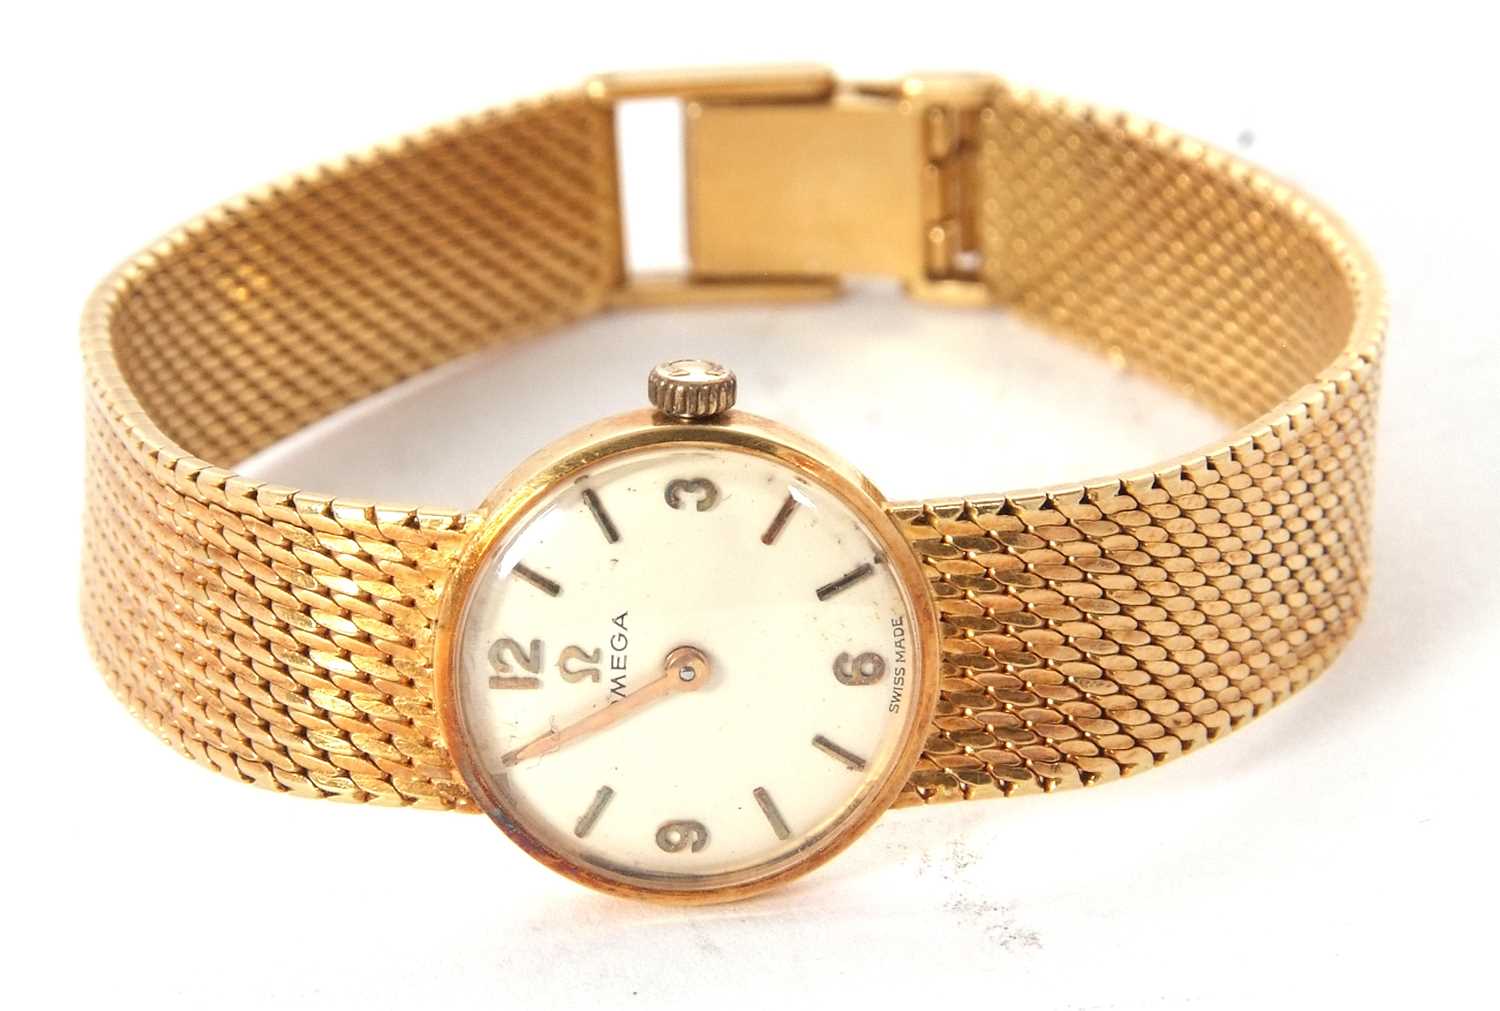 An 18ct ladies Omega wristwatch, the watch features a crown wound movement with a cream dial with - Image 5 of 5